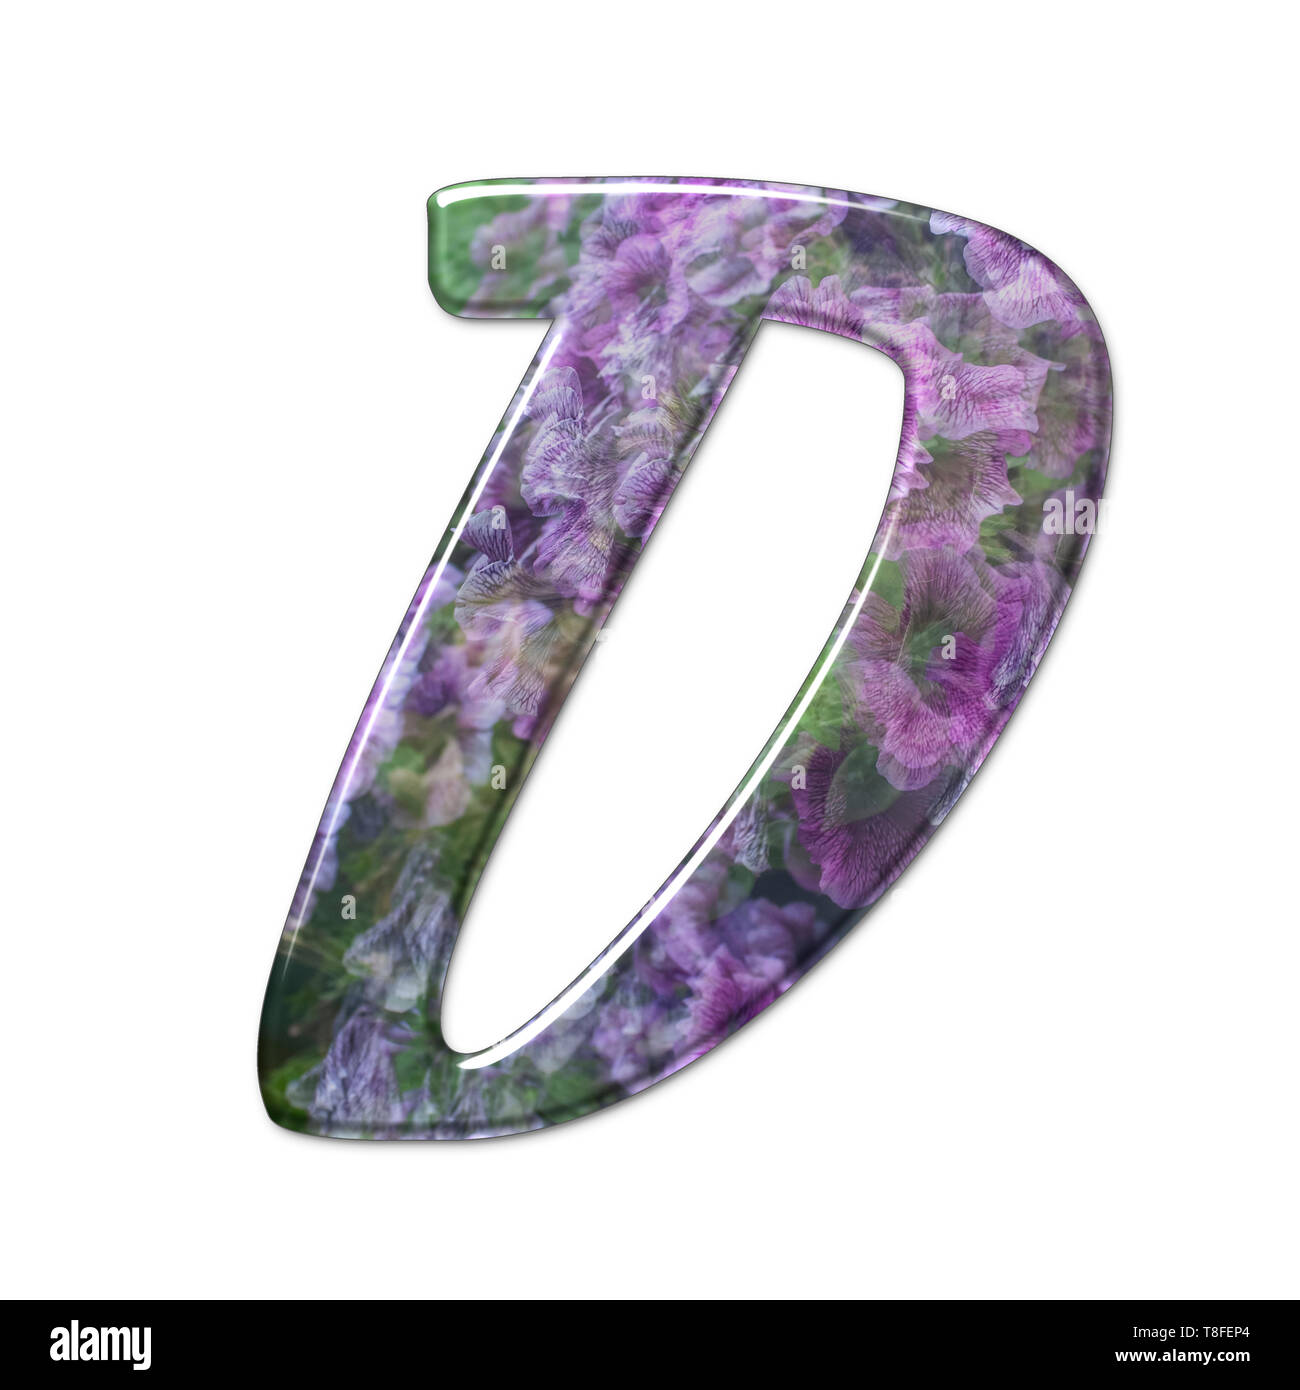 The Capitol Letter D Part of a set of letters, Numbers and symbols of 3D Alphabet made with a floral image on white background Stock Photo